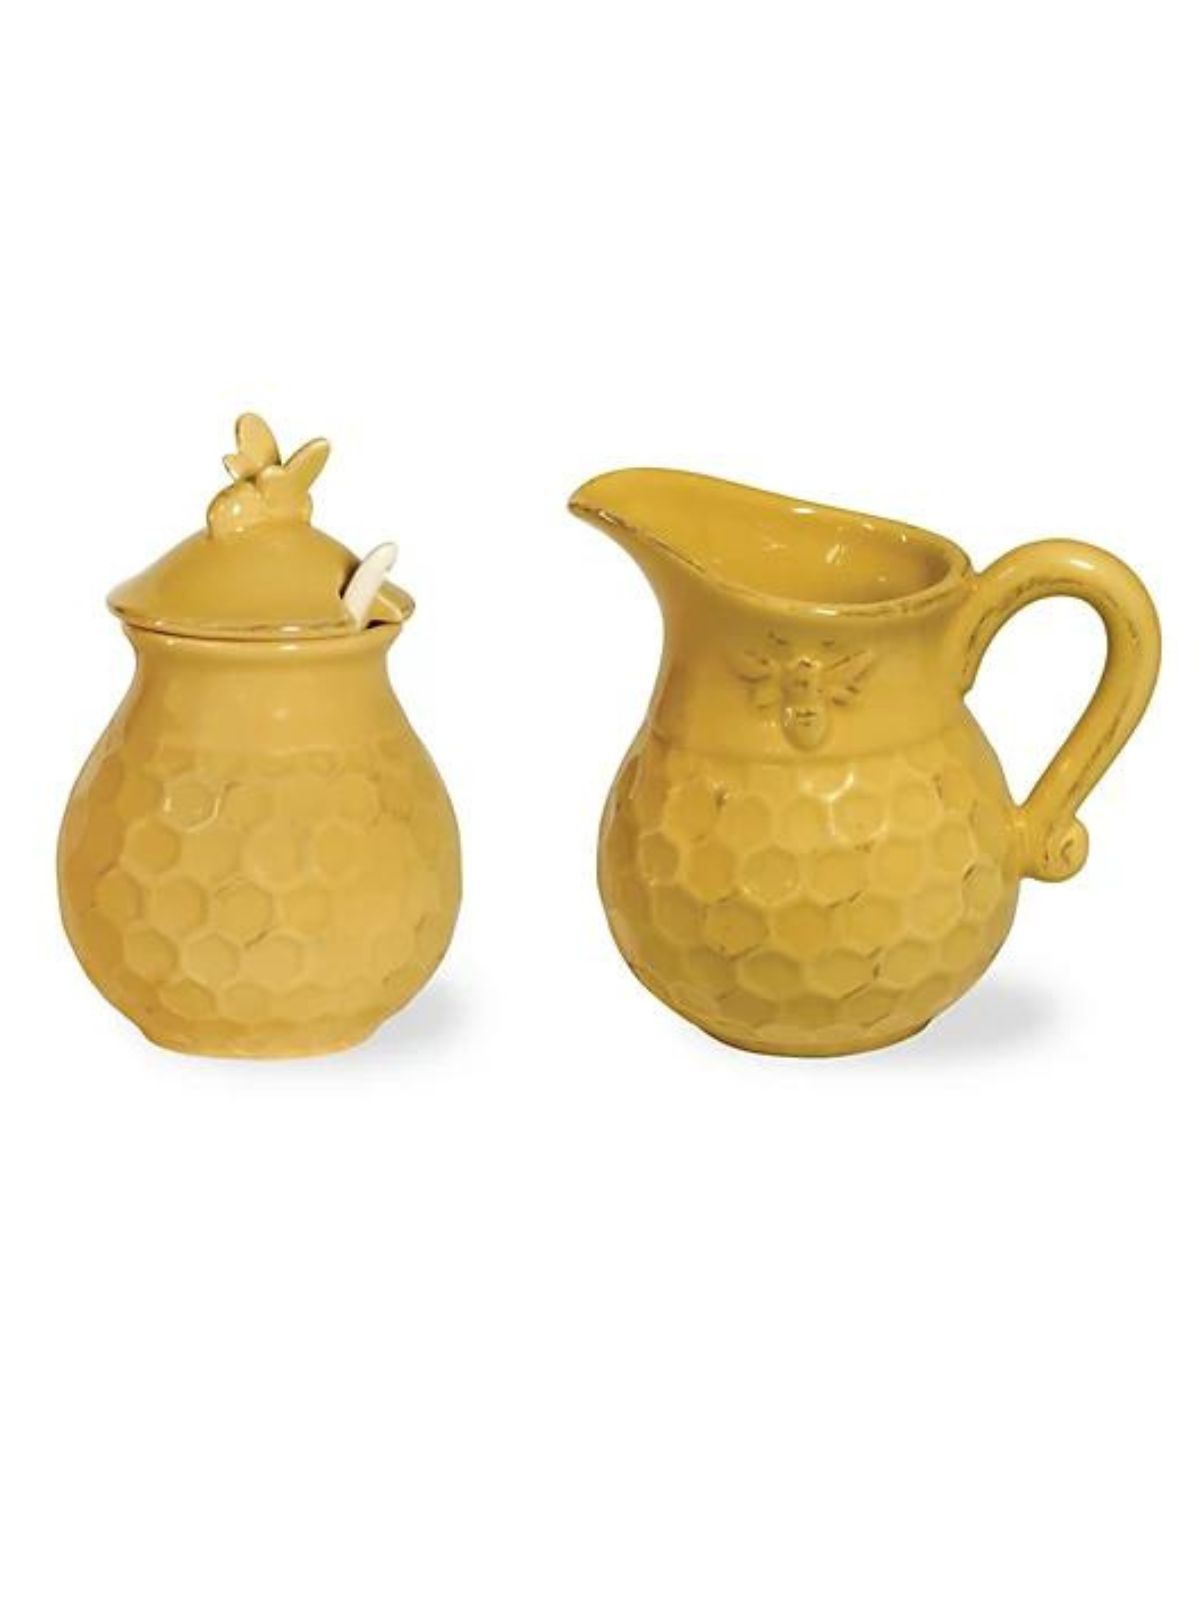 Make a bold statement at any meal with charming Honeycomb set. Crafted in durable ceramic, each dark yellow piece is embossed with a honeycomb pattern and a bee.